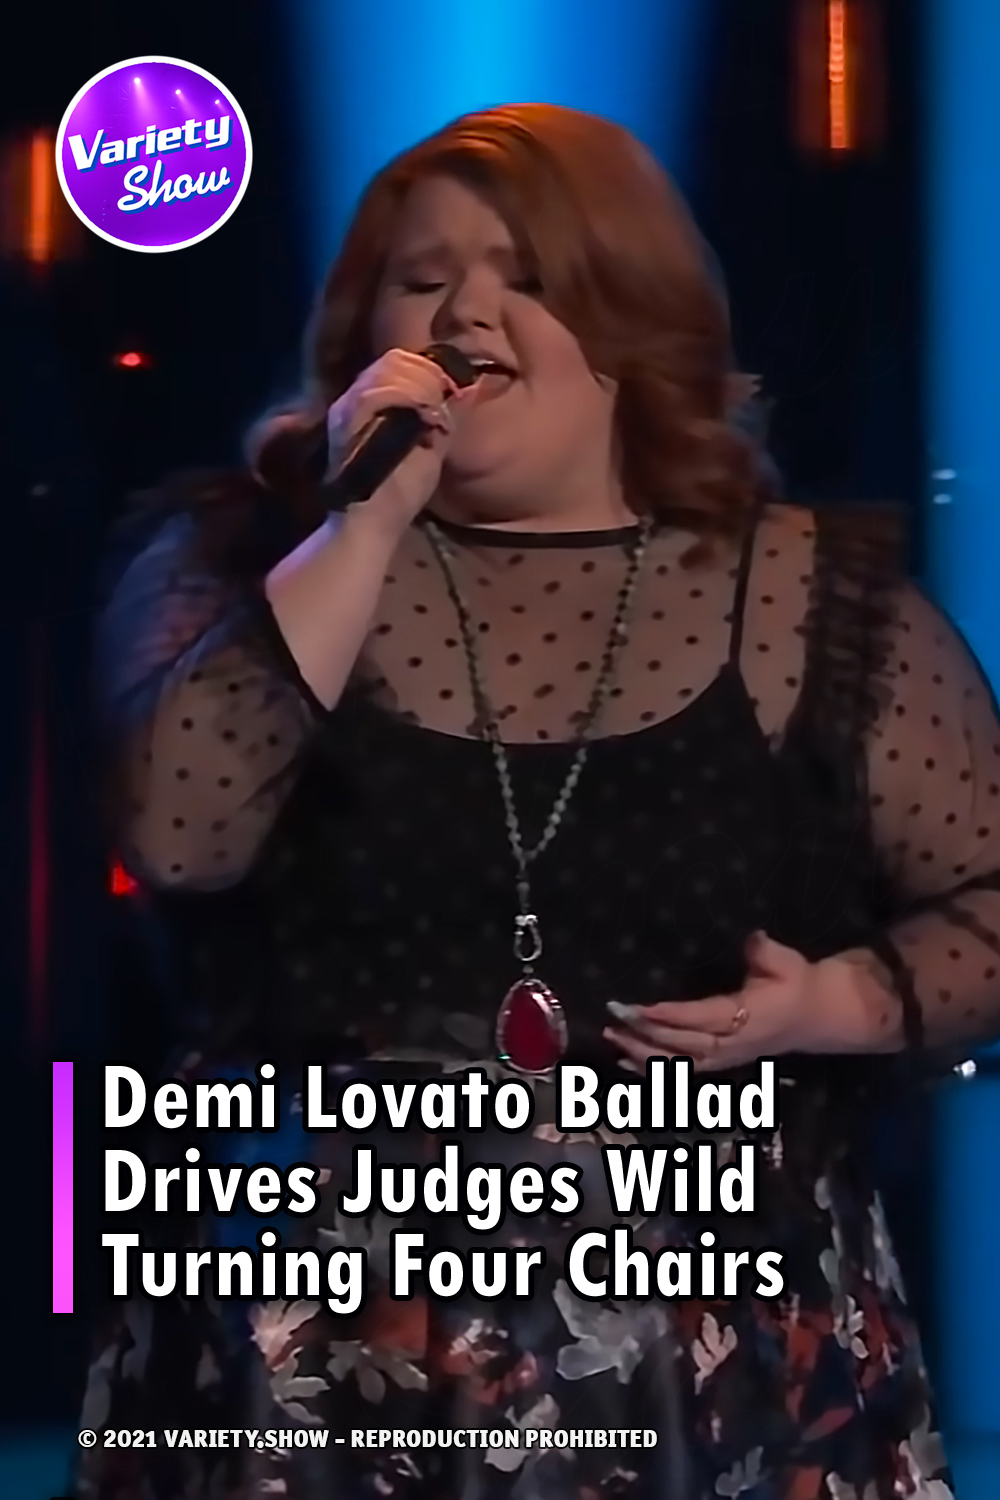 Demi Lovato Ballad Drives Judges Wild Turning Four Chairs